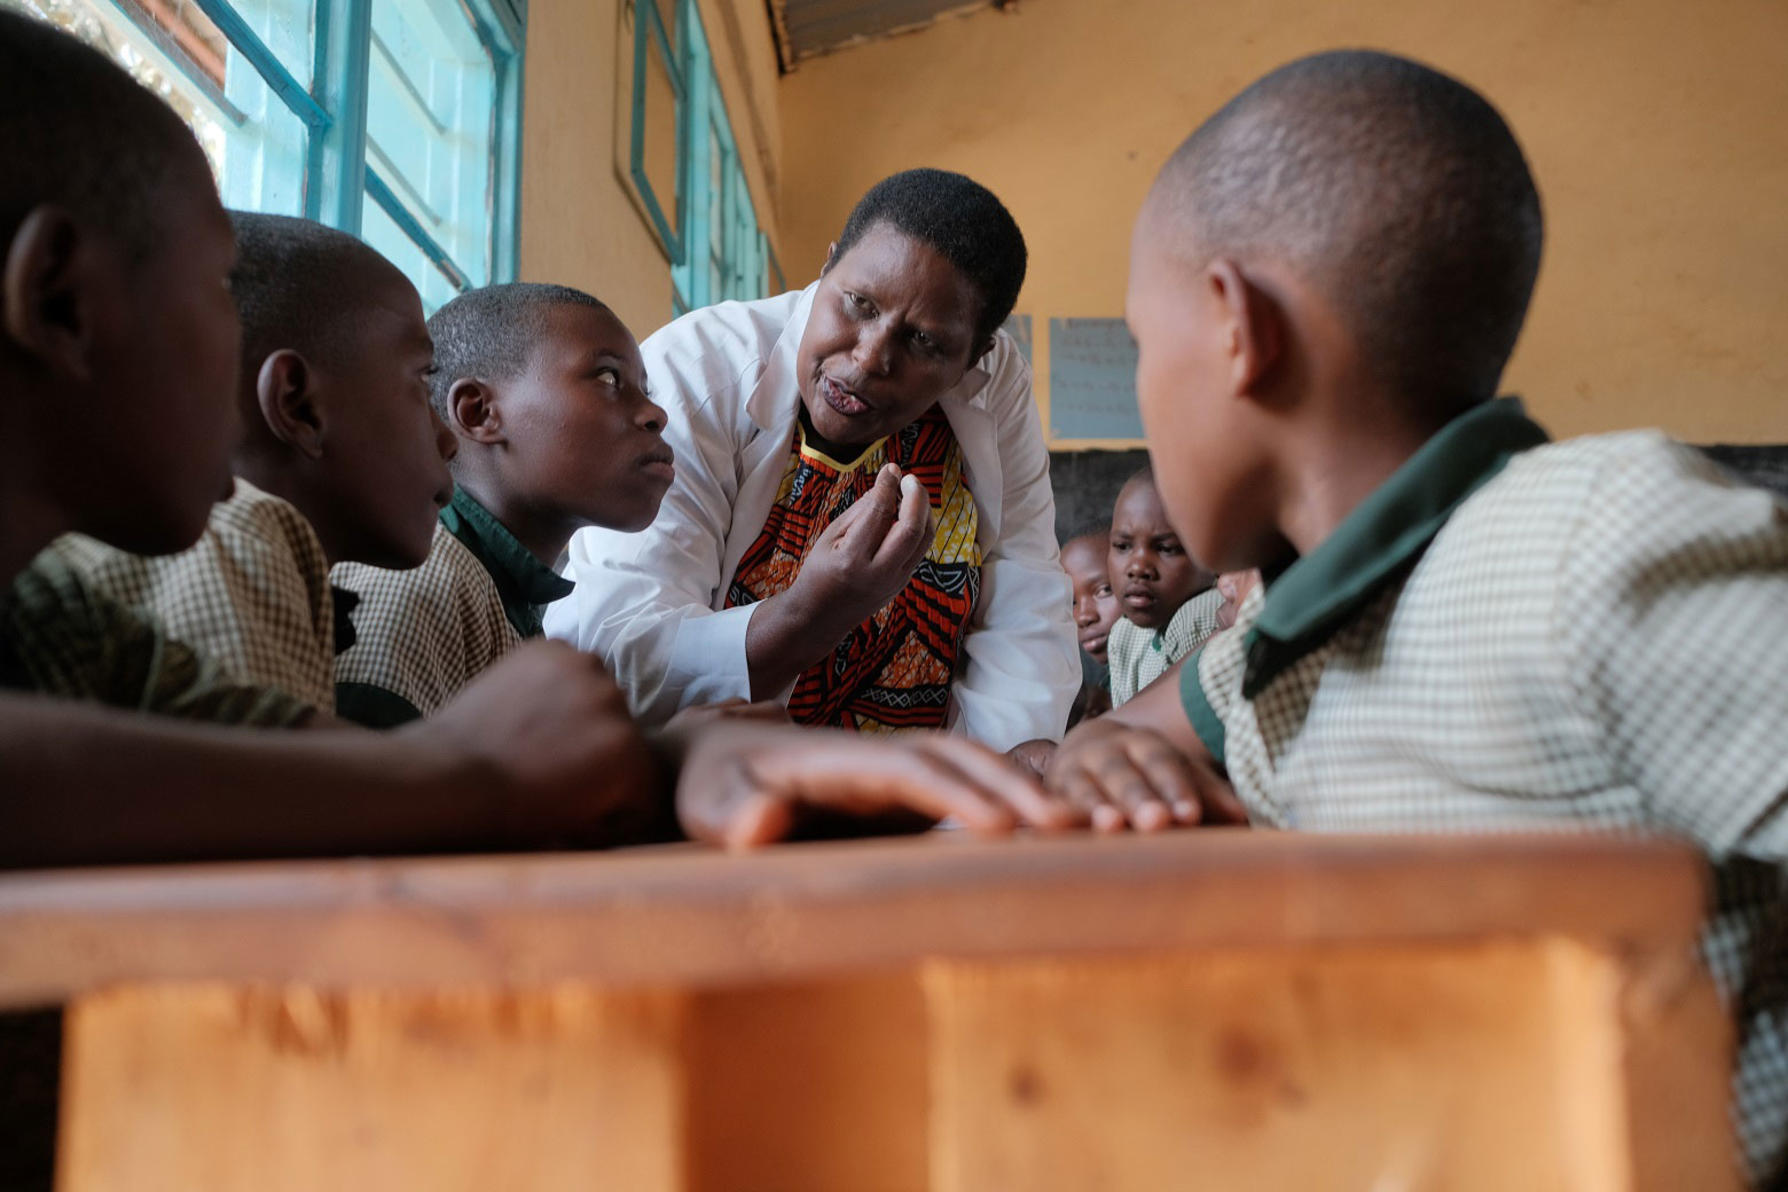 Schoolteacher Ruth Mukankuranga in a Kigali school today. Prior to the 1994 genocide, discrimination was taught as part of the school culture, written into school history books and perpetuated within the educational system.